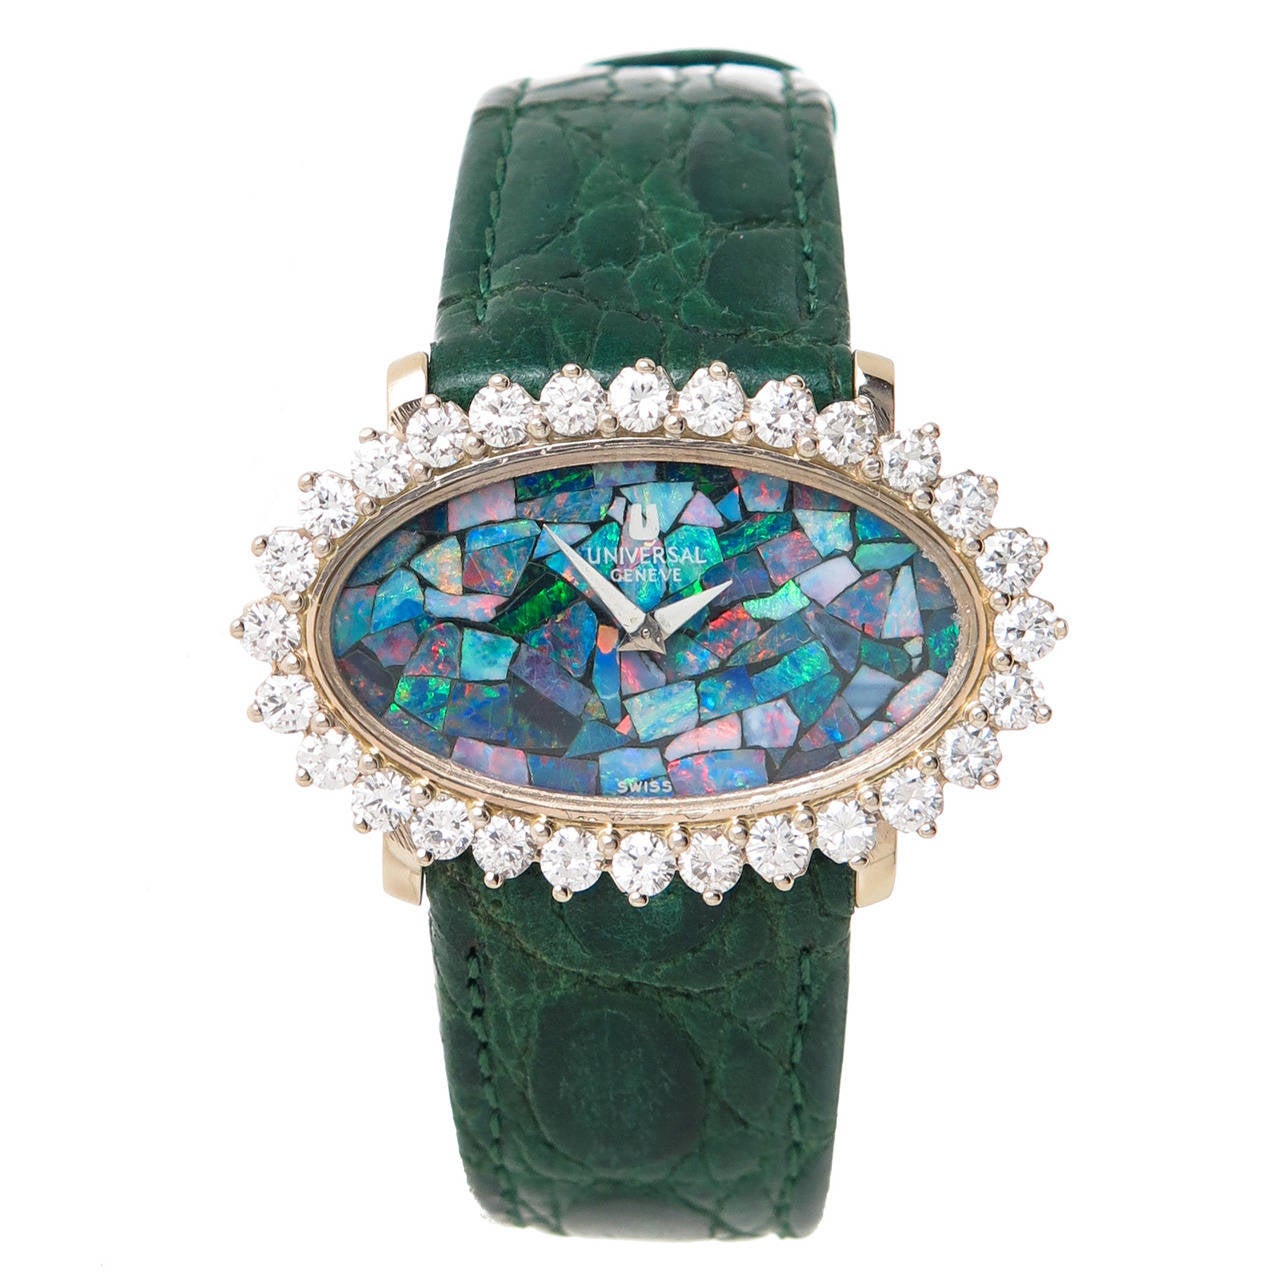 Univeral Lady's White Gold and Diamond Wristwatch with Opal Dial circa 1970s